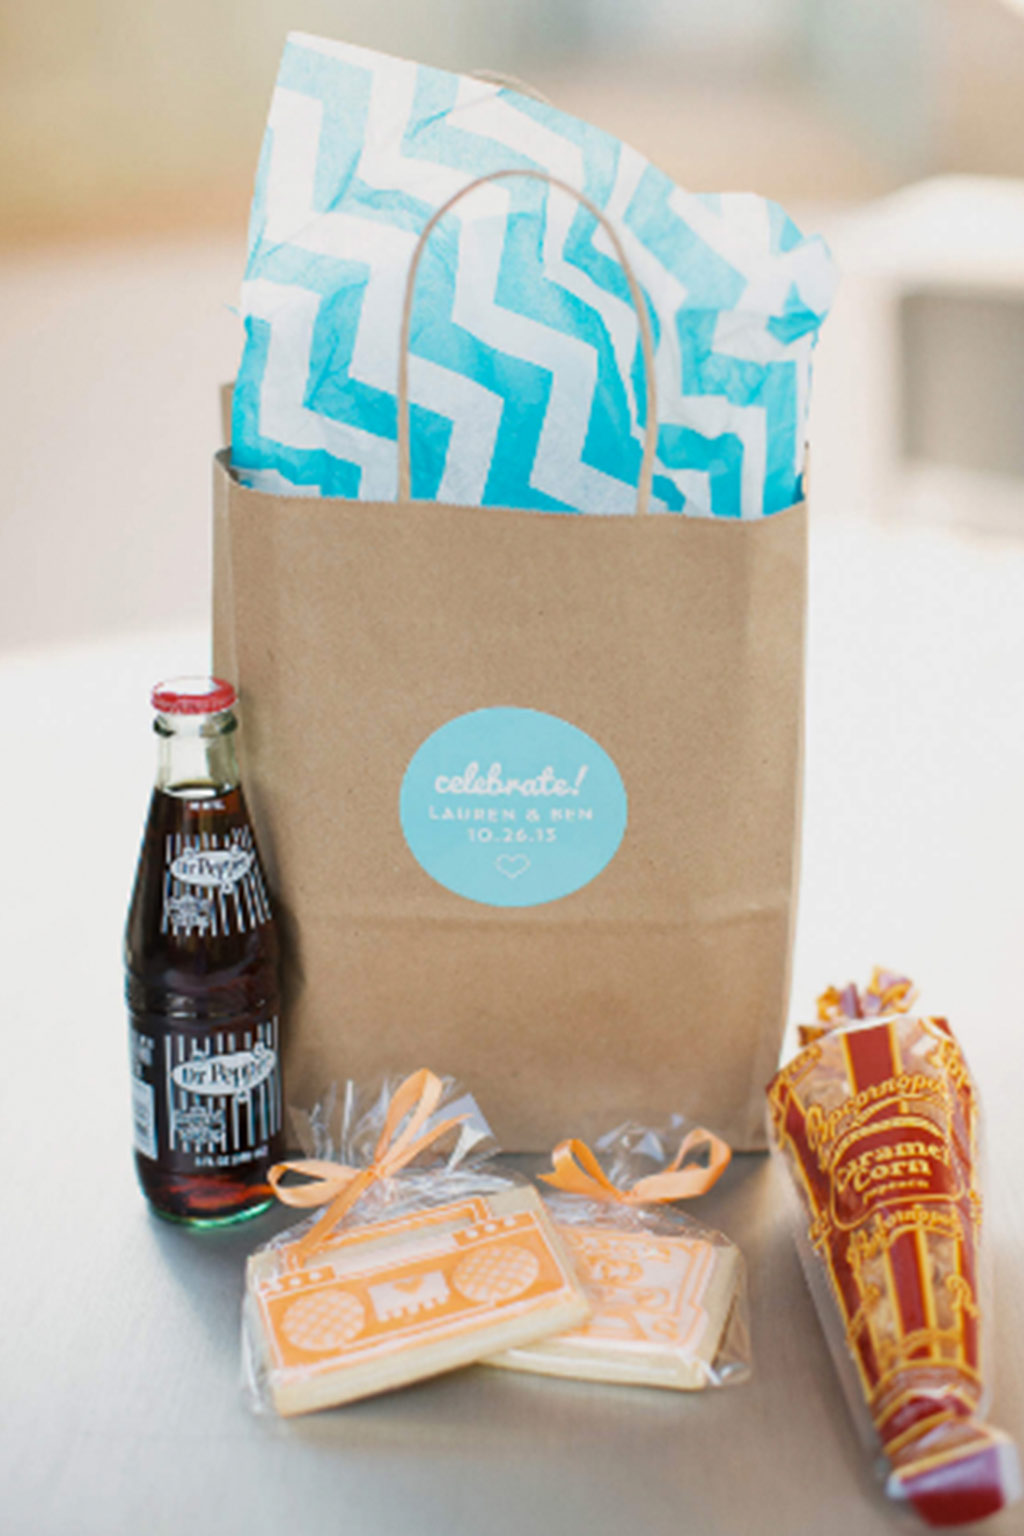 Dr. Pepper, popcorn, and tape cassette cookies in wedding out of town welcome hotel bag